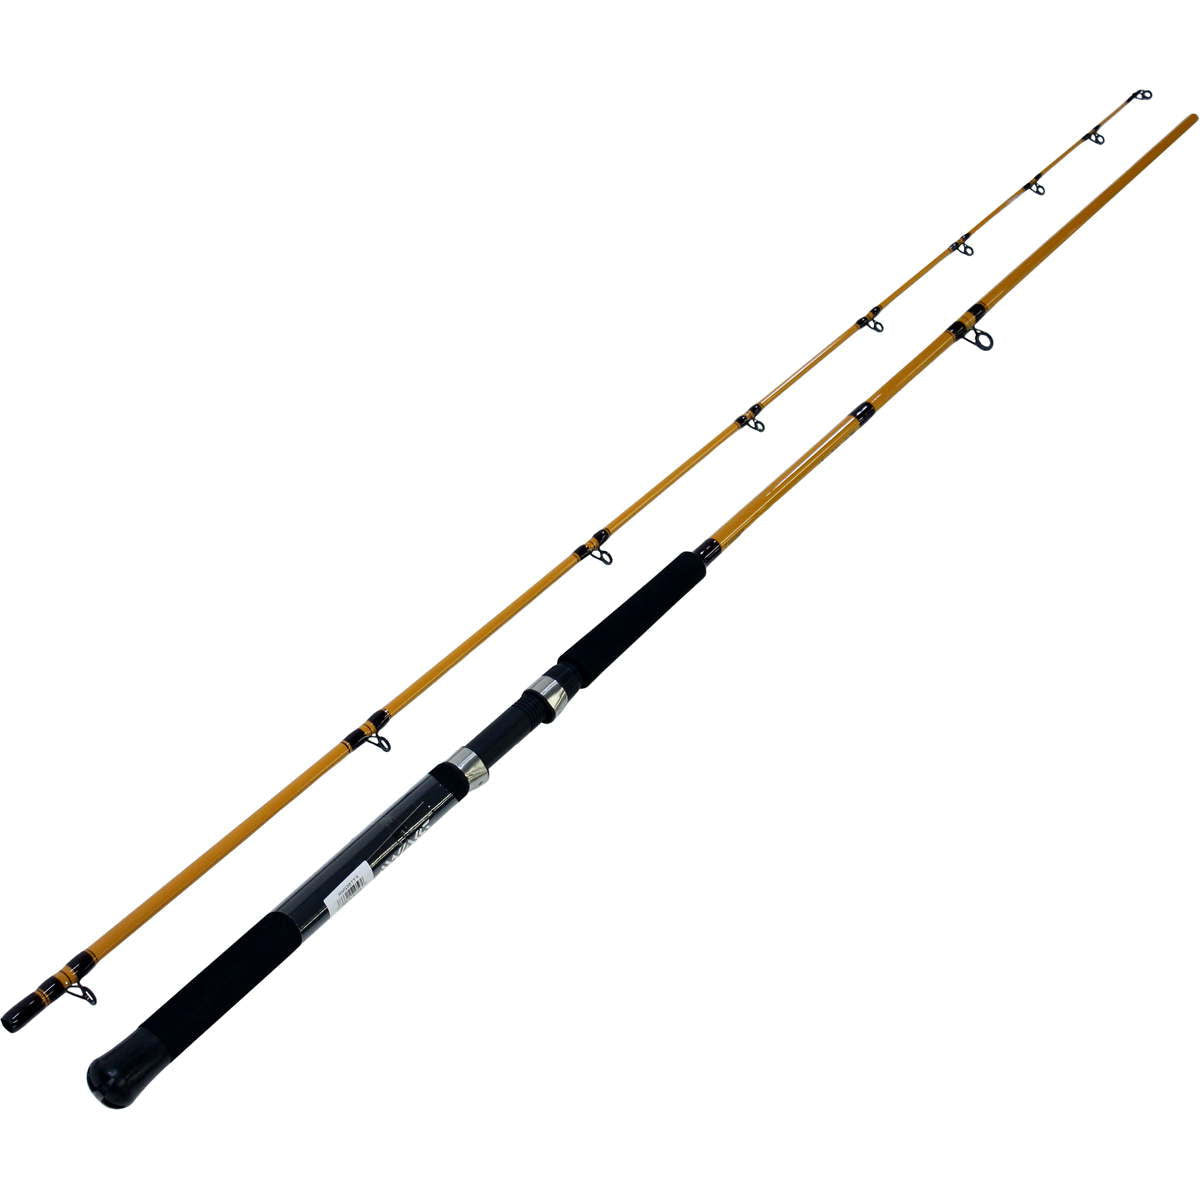 Photo of Daiwa FT Trolling Series Downrigger Rod for sale at United Tackle Shops.